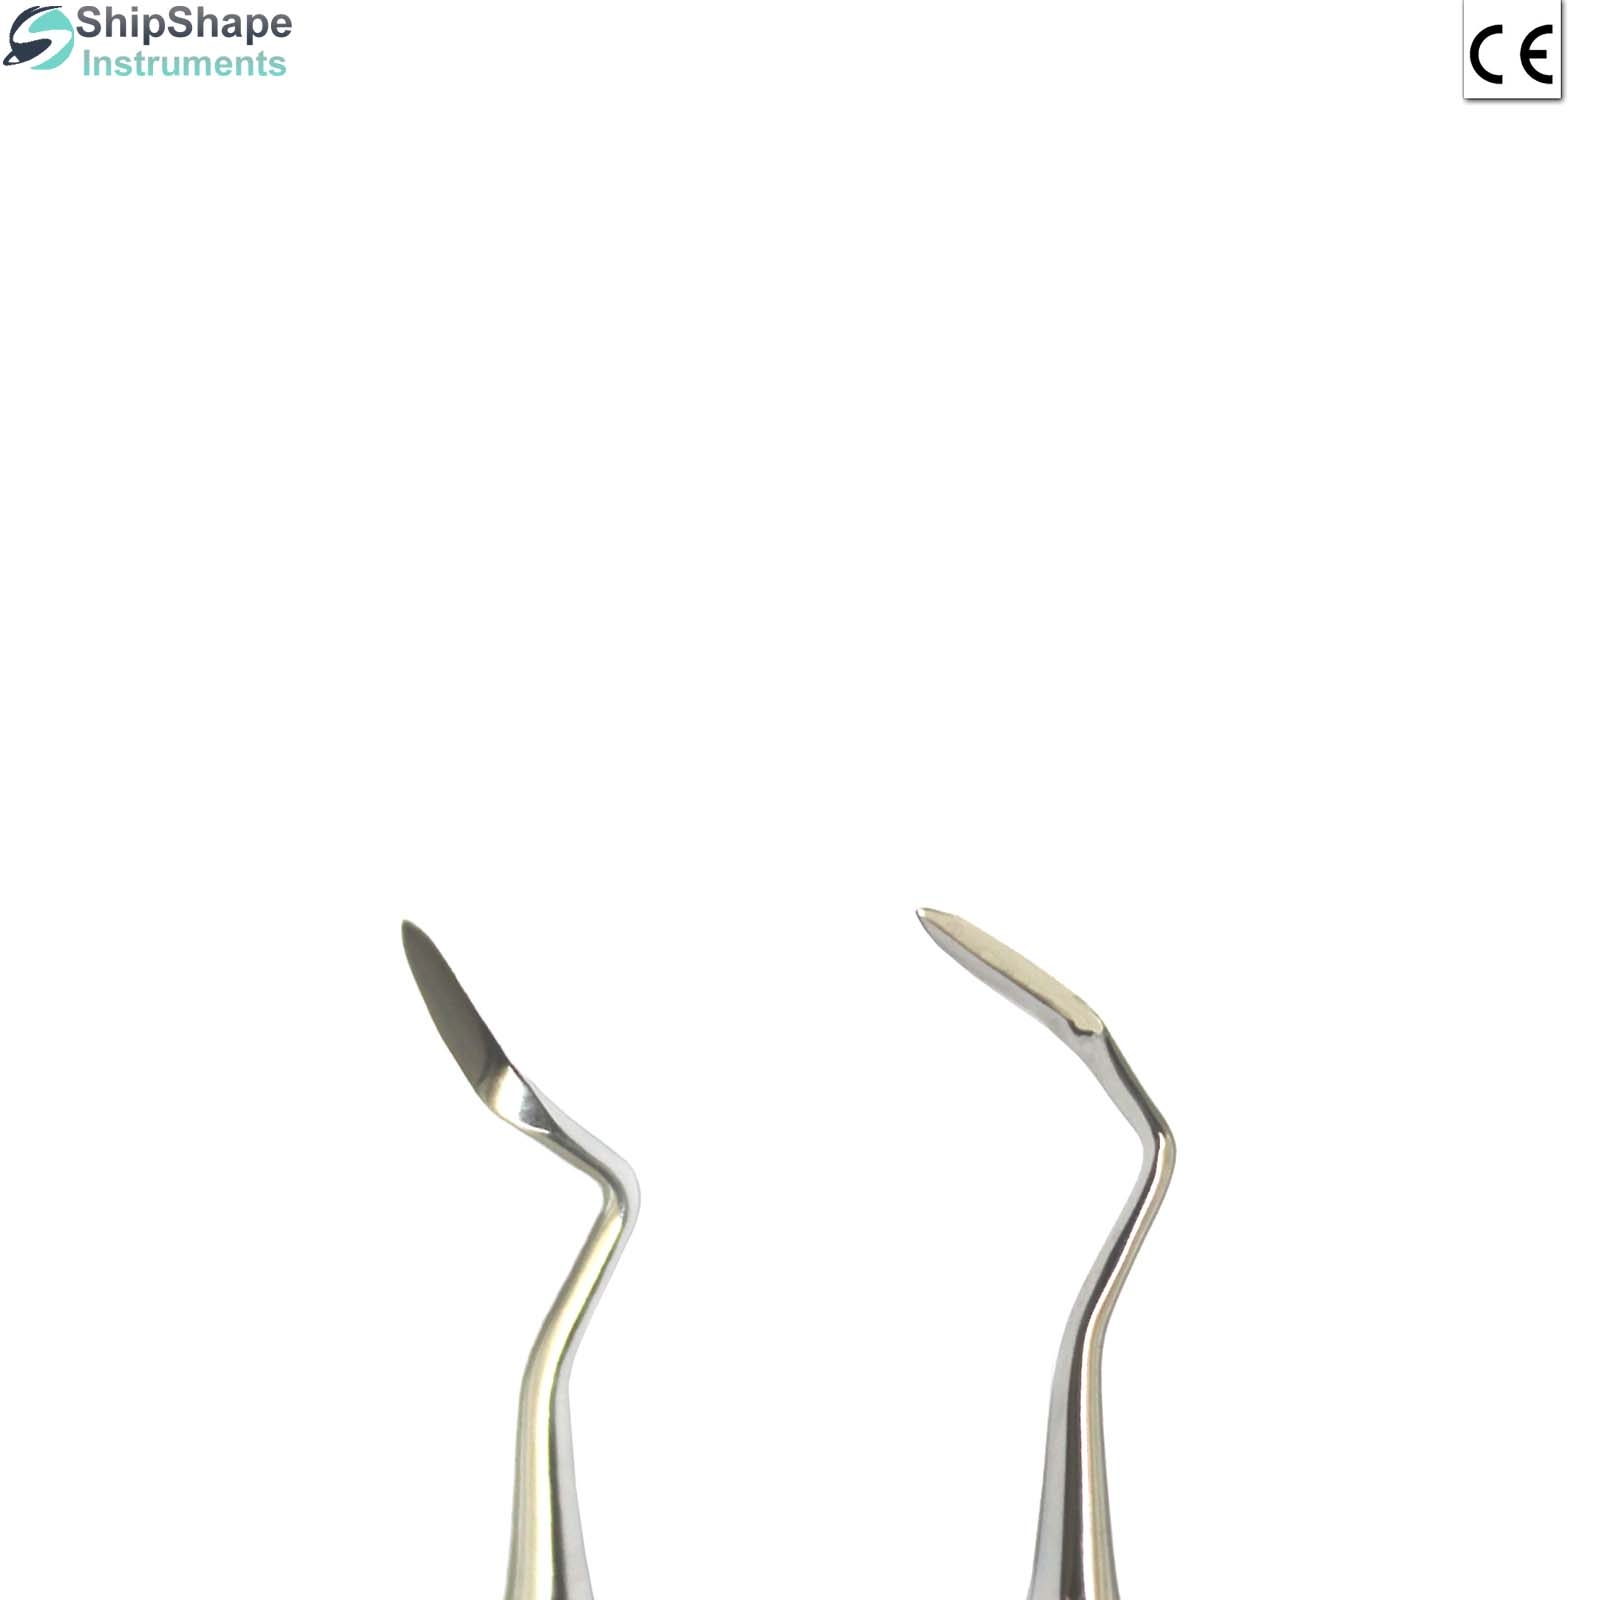 Priodontal Tissue Surgery Excising Interproximal Orban Knife for Posterior Use Dental Double Ended Instruments-810